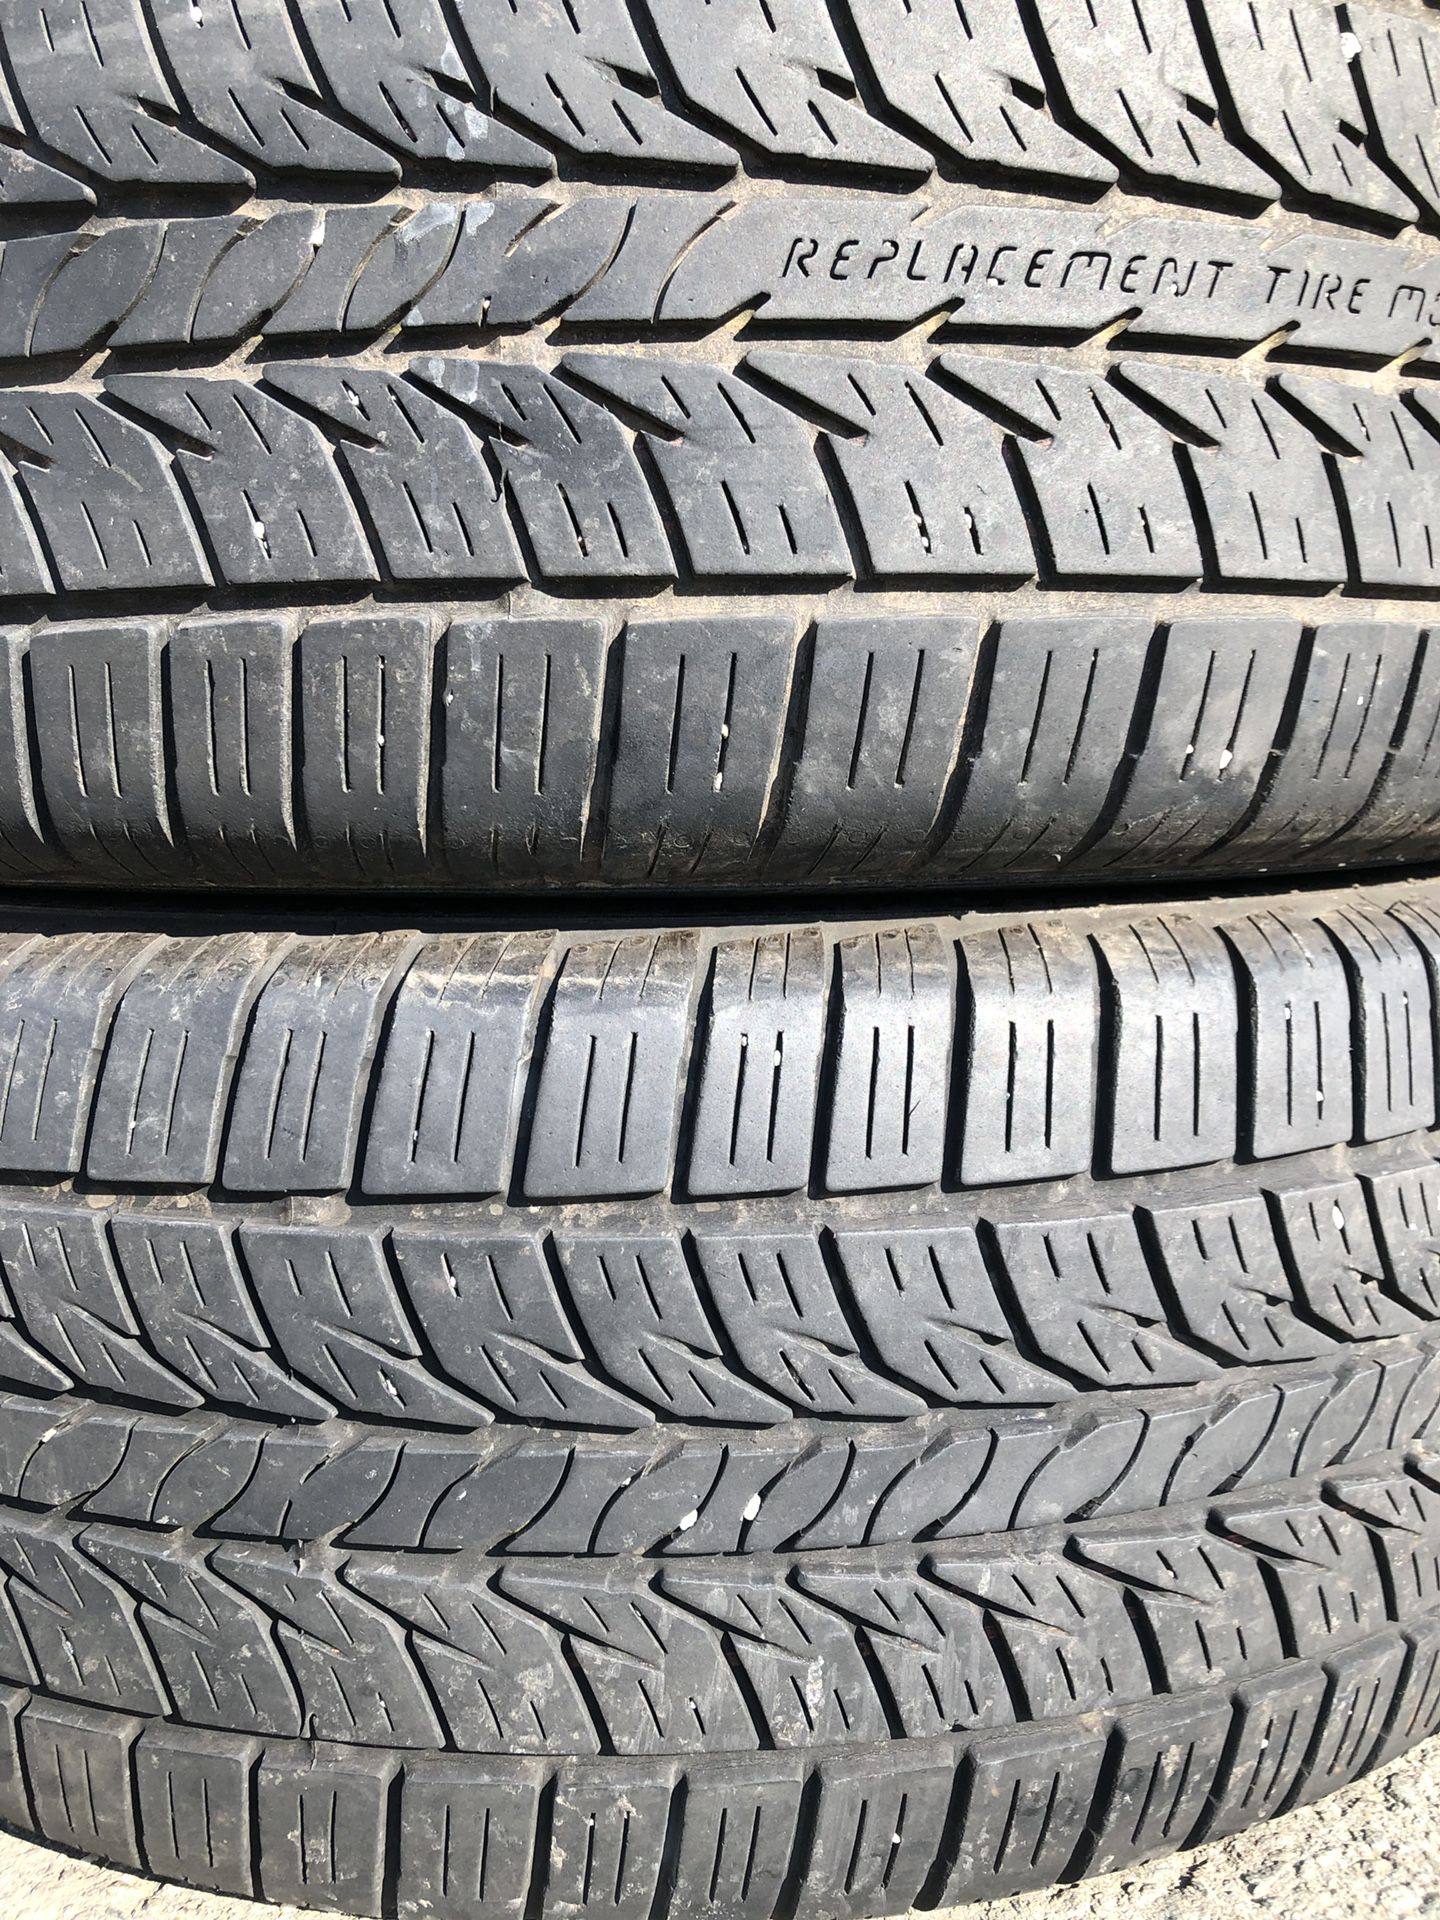 Two used tire 215/60R15 GENERAL ALTIMA X RT43 two used tire $45 2 llantas usadas GENERAL ALTIMA X RT43 por las 2 llantas $45